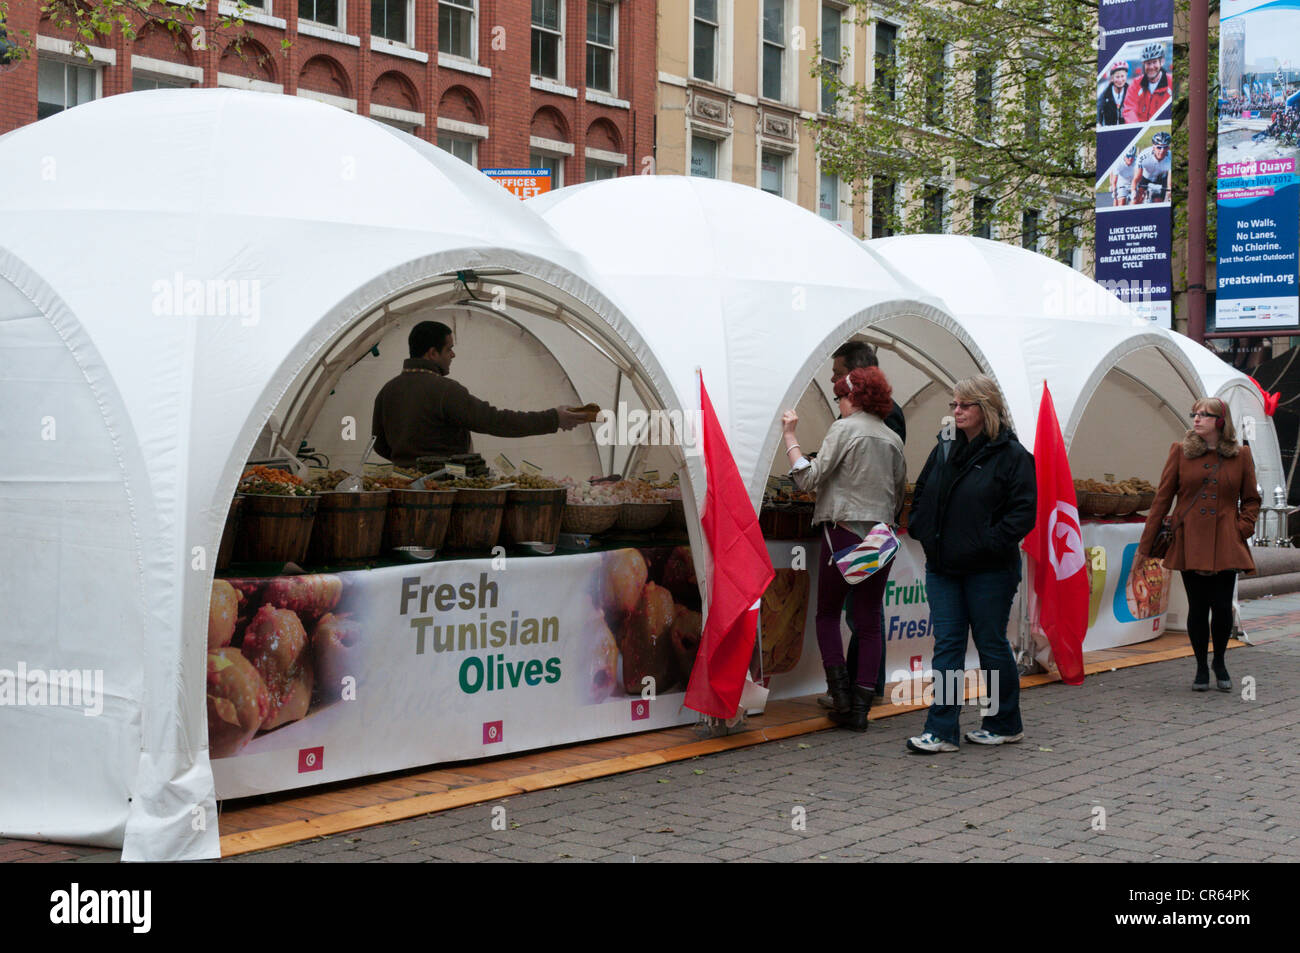 A market in St Anne's Square, Manchester selling Tunisian Olives. Stock Photo